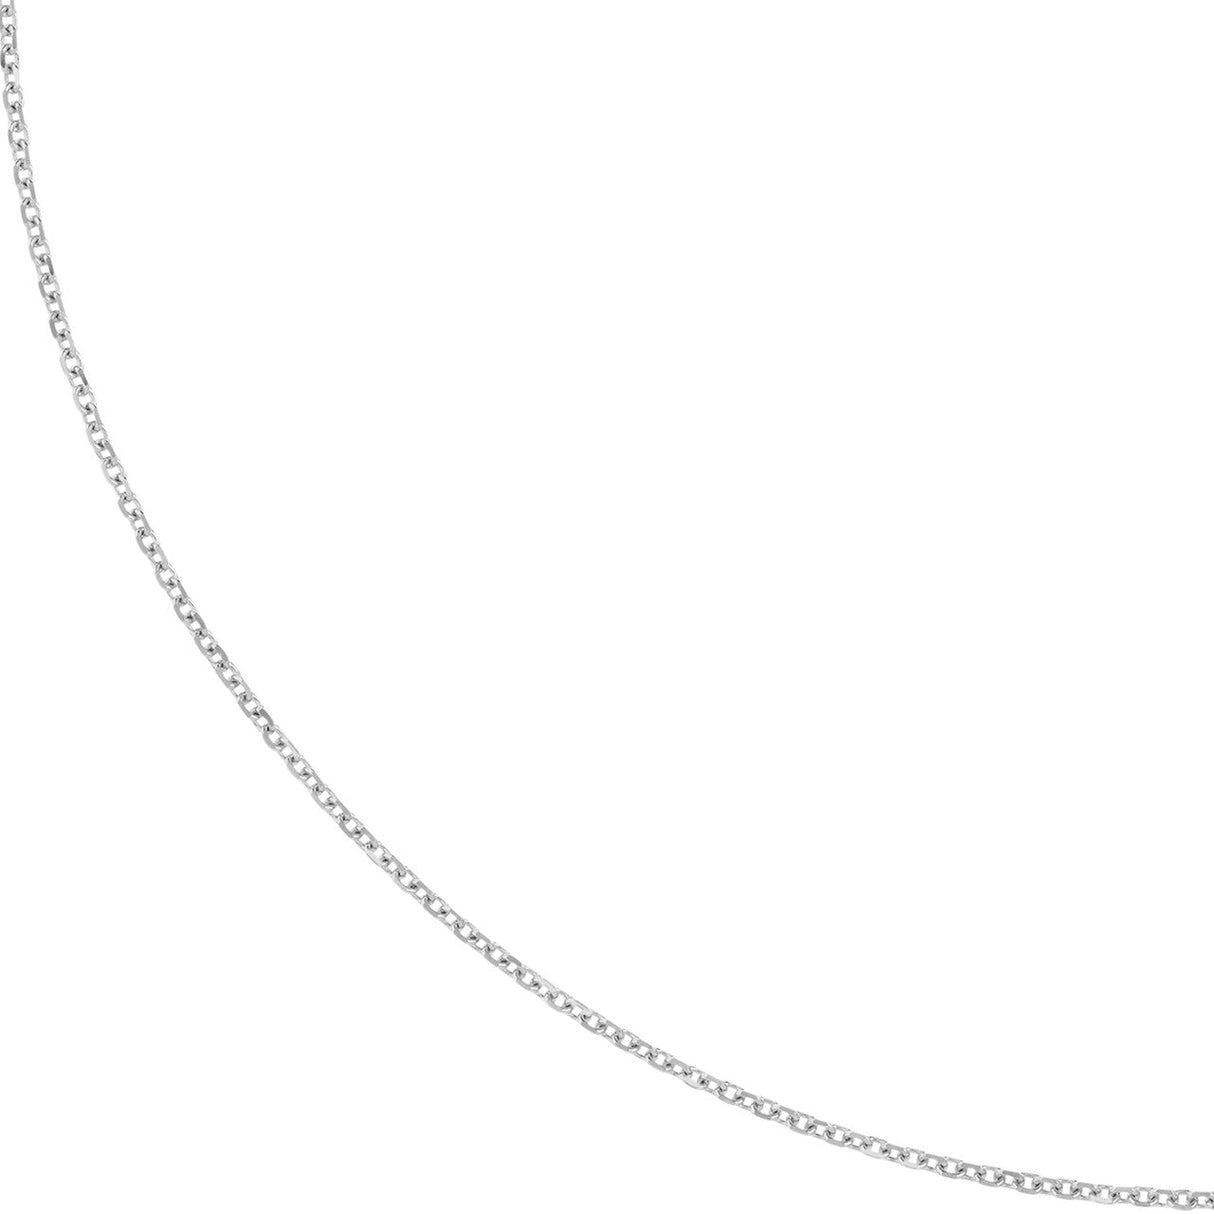 14K Gold Chain, 24", 1.05mm Diamond Cut Cable Chain with Lobster Lock, Gold Layered Chains, Gold Chain Necklace, - Diamond Origin